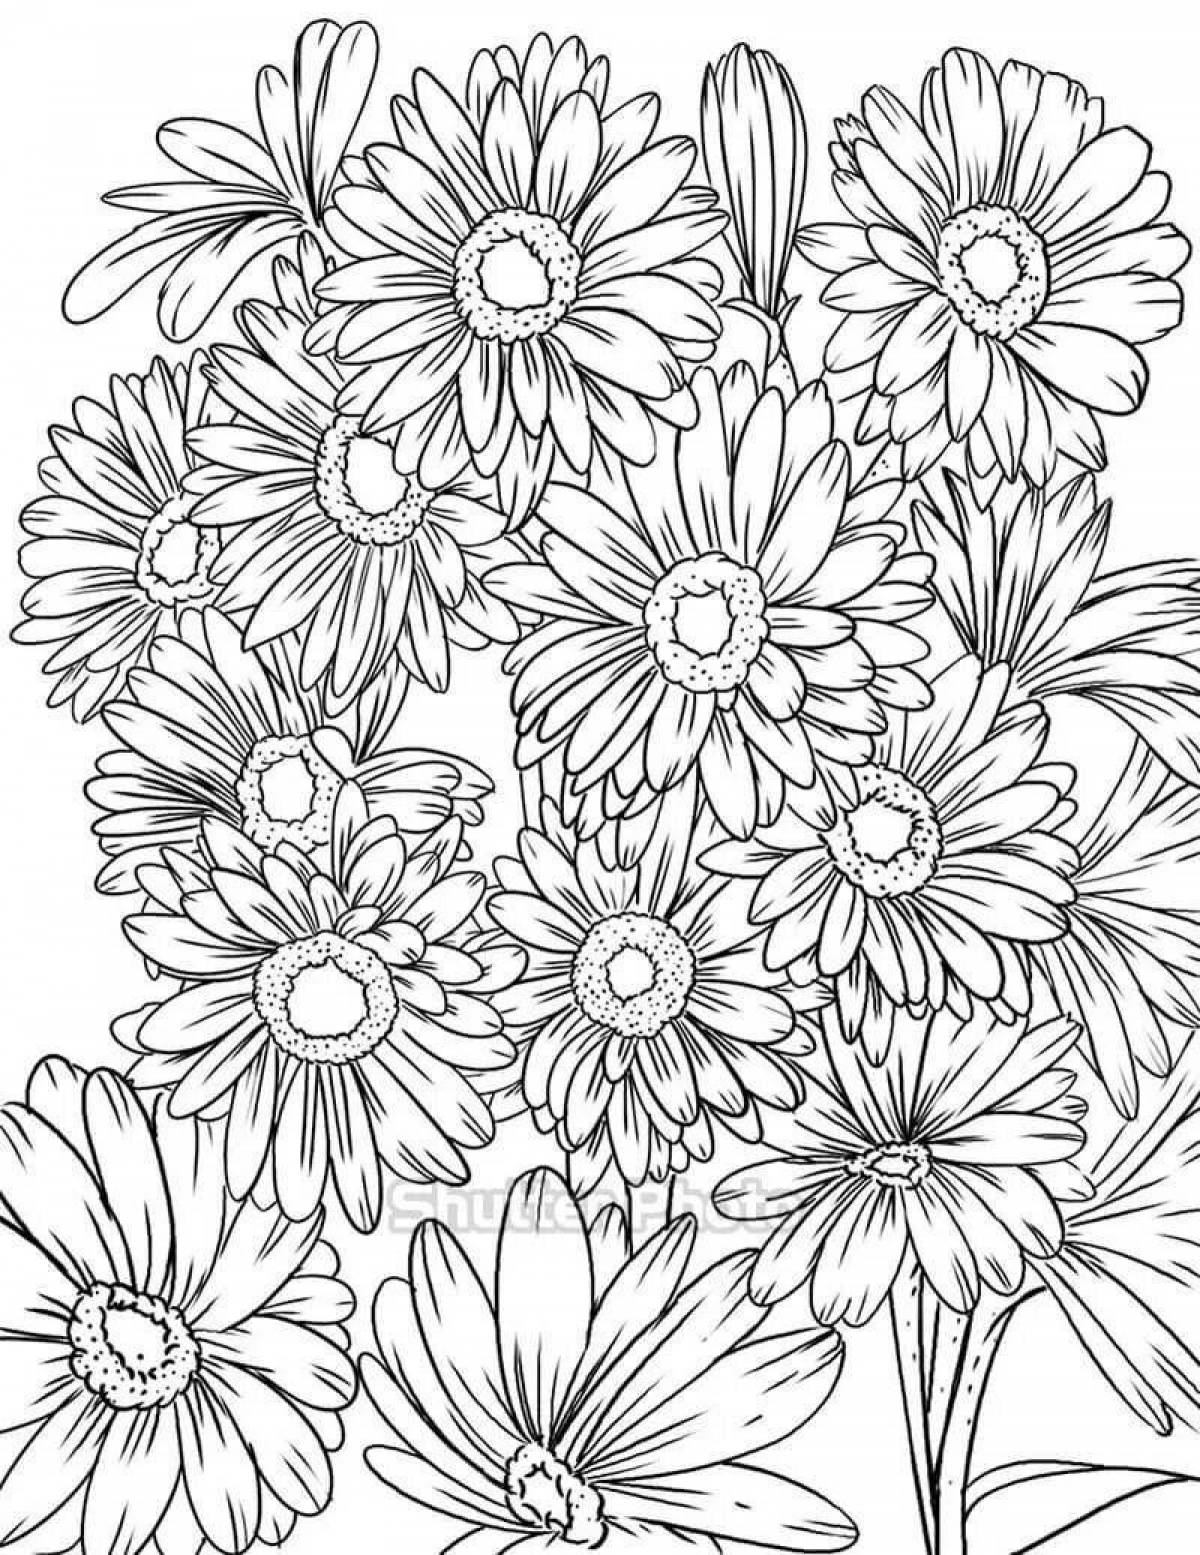 Coloring big bouquet of daisies